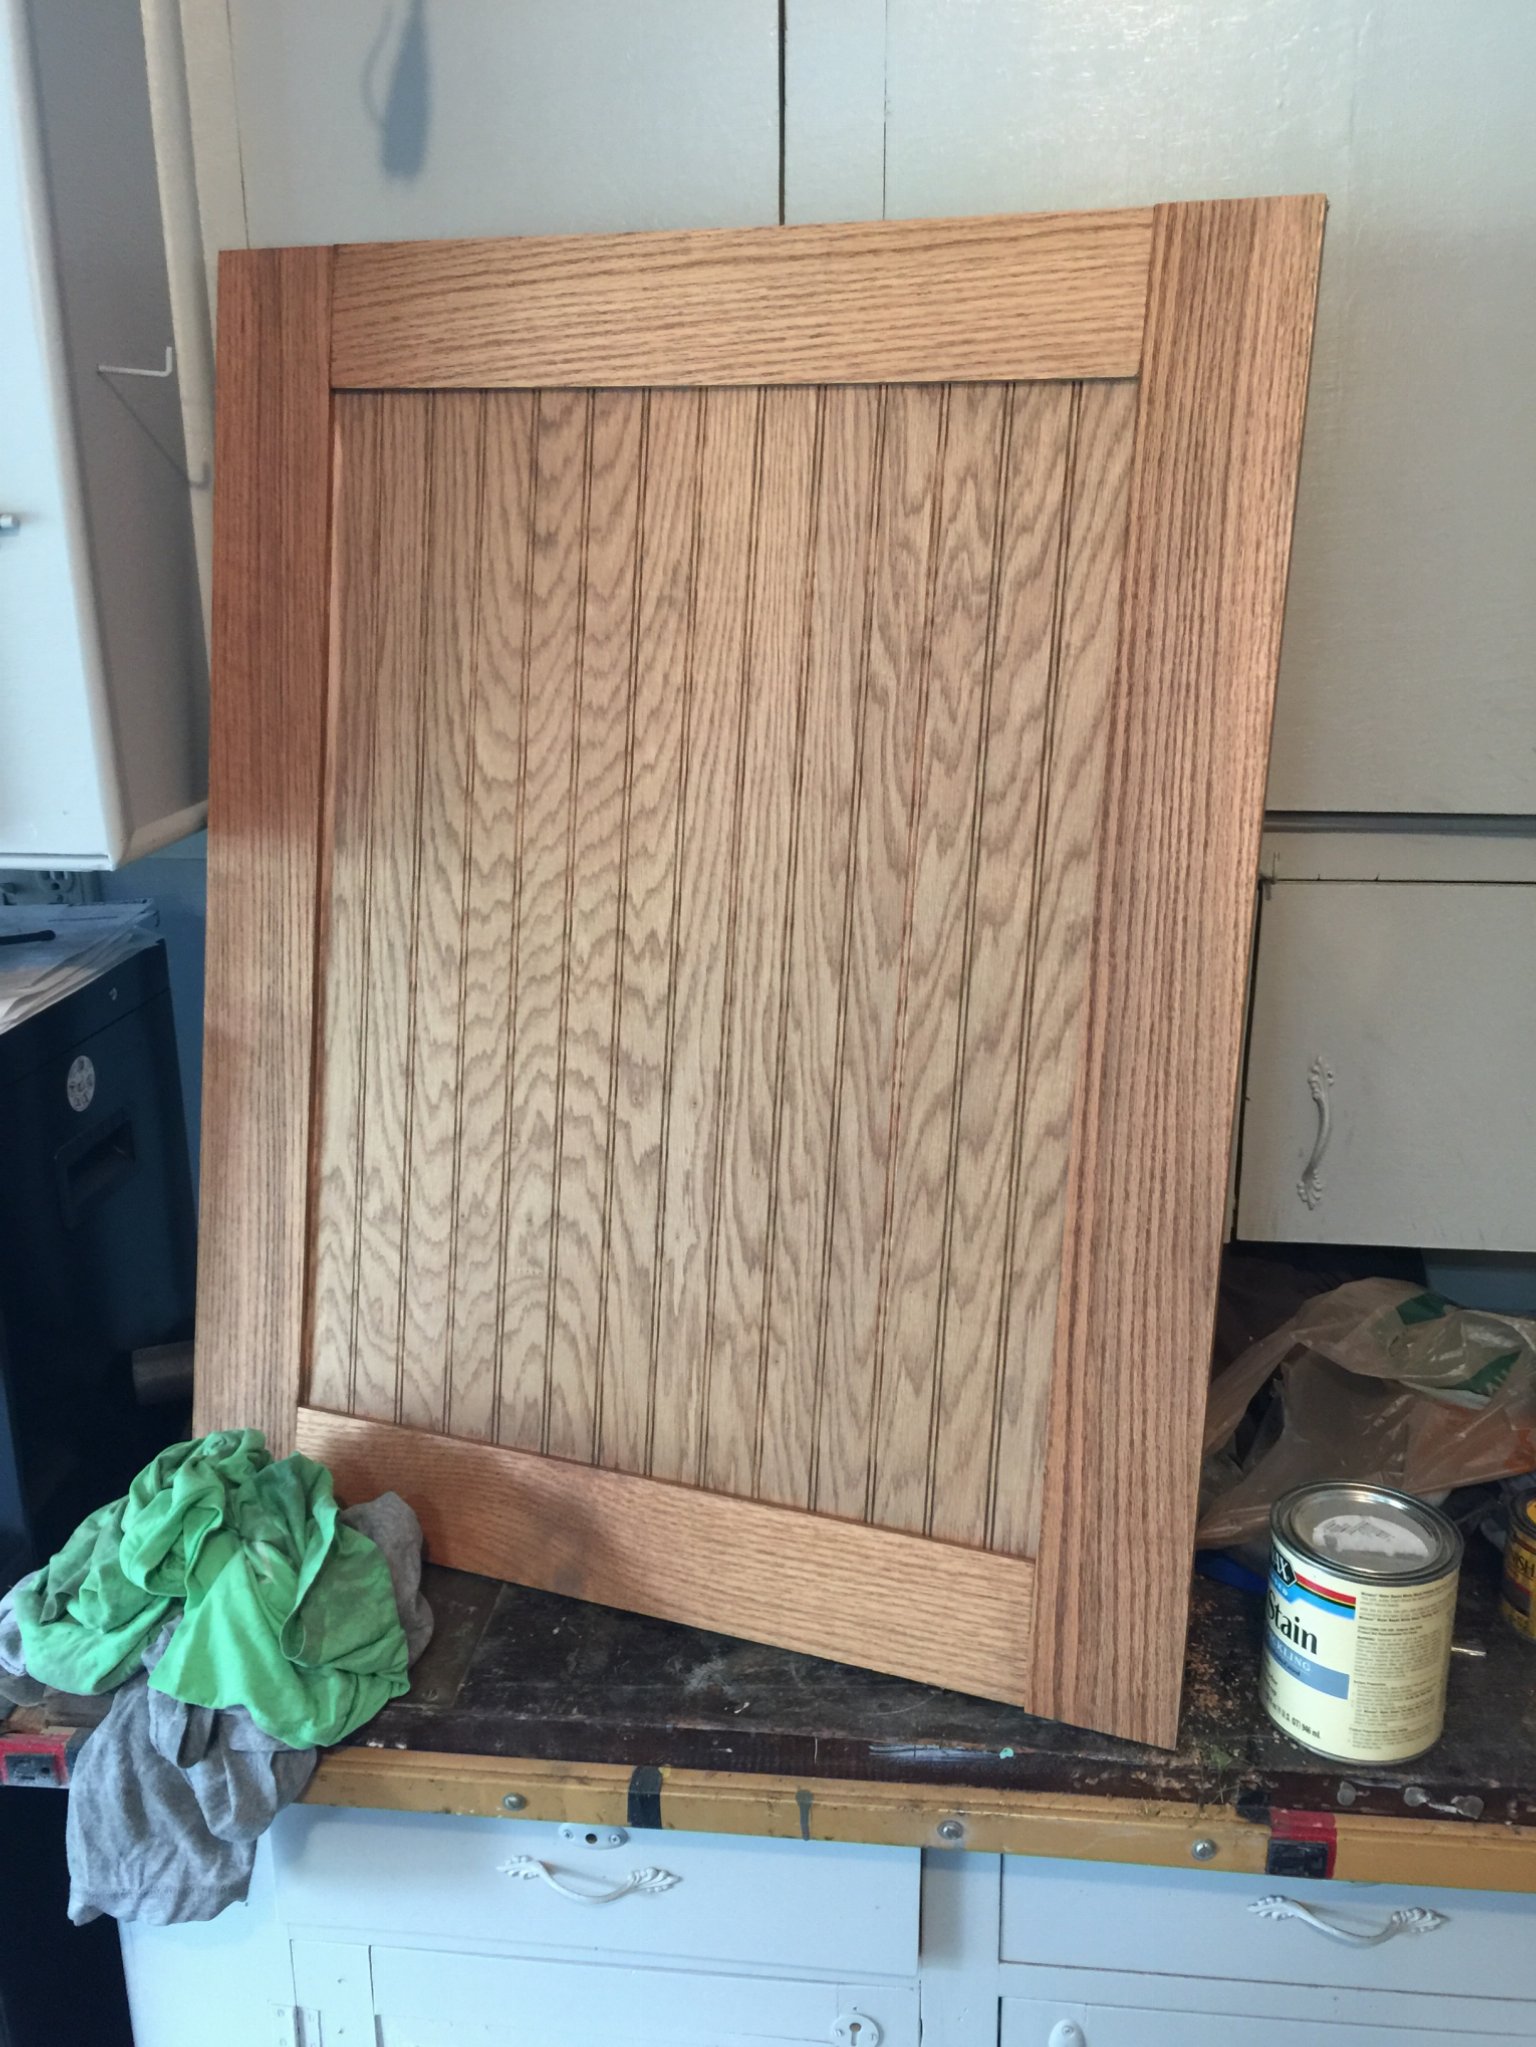 Finished stand door